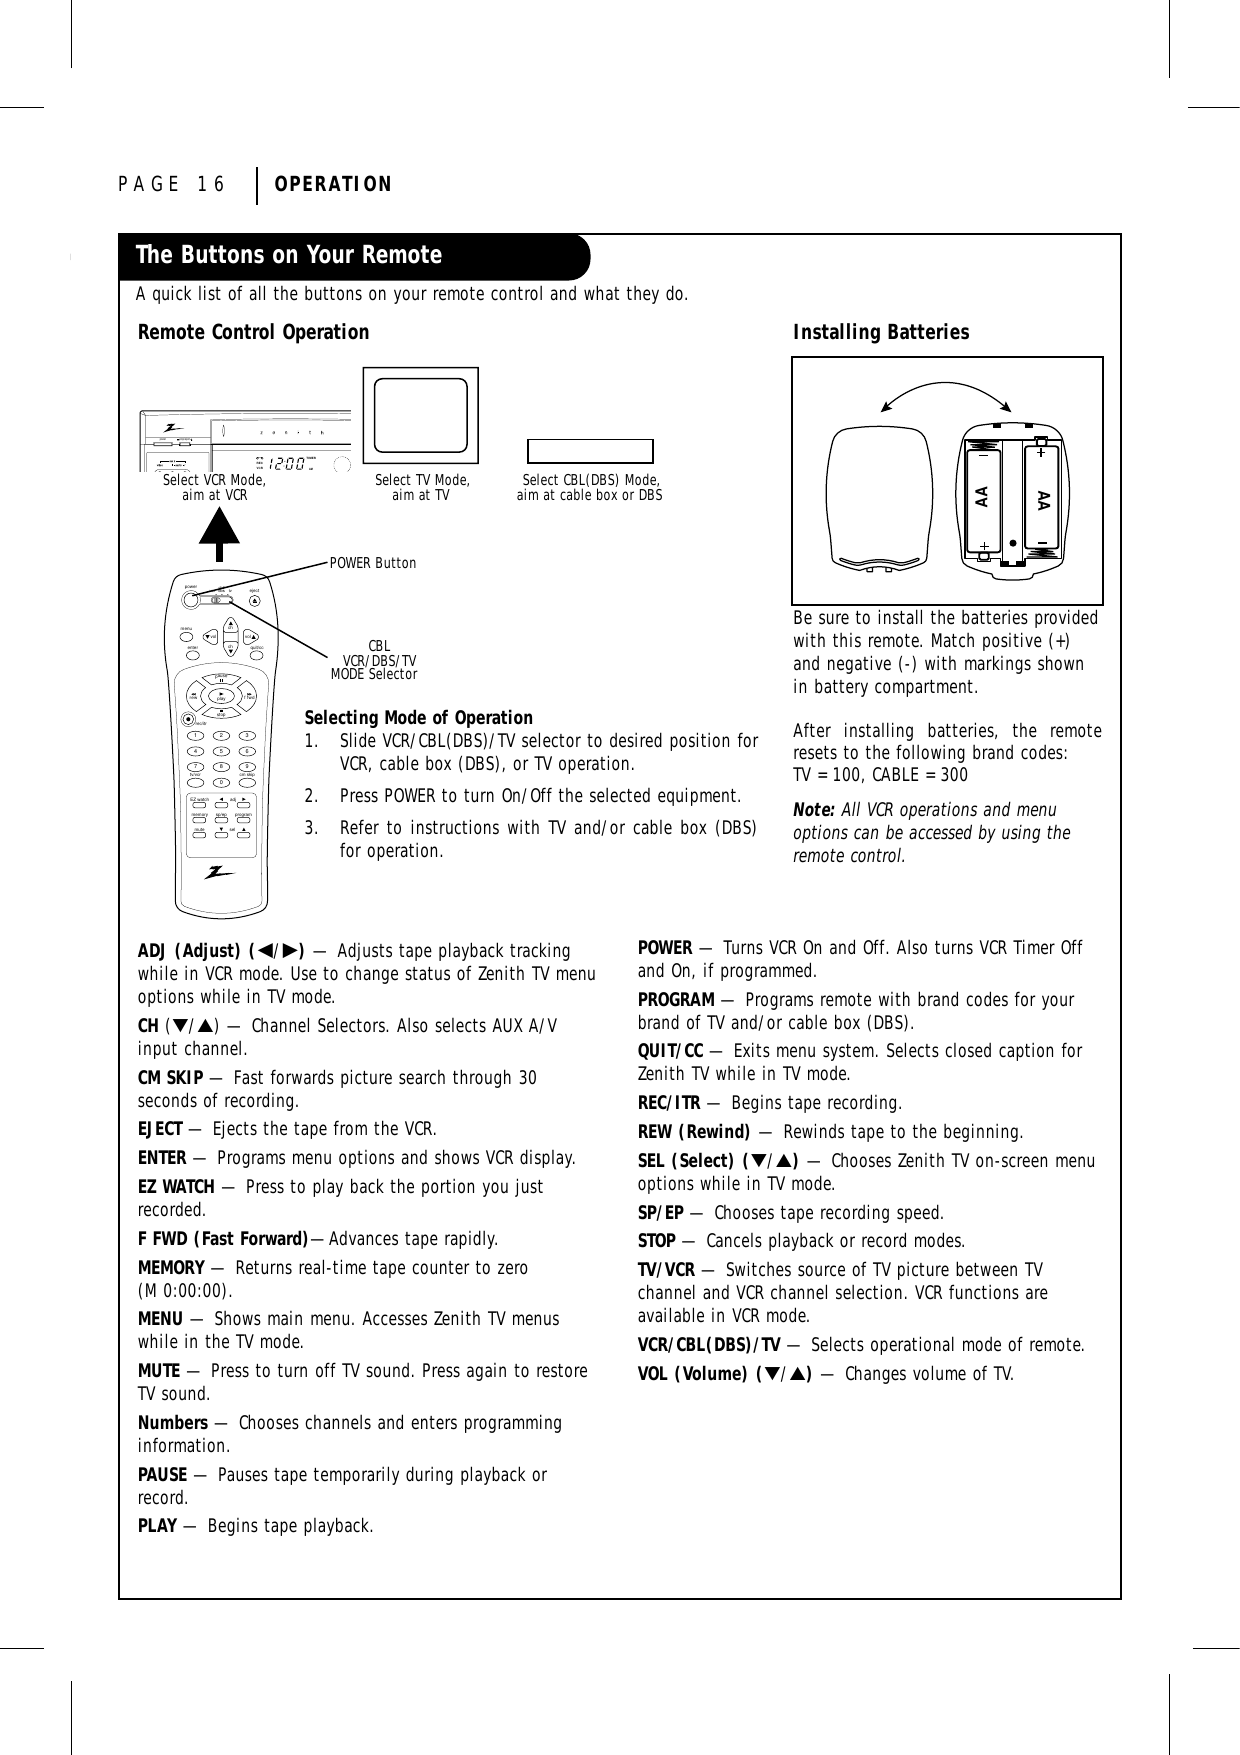 PAGE 16 OPERATIONThe Buttons on Your RemoteA quick list of all the buttons on your remote control and what they do.Installing BatteriesAAAABe sure to install the batteries providedwith this remote. Match positive (+)and negative (-) with markings shownin battery compartment.After installing batteries, the remoteresets to the following brand codes:TV = 100, CABLE = 300Note: All VCR operations and menuoptions can be accessed by using theremote control.ADJ (Adjust) (F/G)— Adjusts tape playback trackingwhile in VCR mode. Use to change status of Zenith TV menuoptions while in TV mode.CH (▼/▲) — Channel Selectors. Also selects AUX A/Vinput channel.CM SKIP — Fast forwards picture search through 30 seconds of recording.EJECT — Ejects the tape from the VCR.ENTER — Programs menu options and shows VCR display.EZ WATCH — Press to play back the portion you justrecorded.F FWD (Fast Forward)—Advances tape rapidly.MEMORY — Returns real-time tape counter to zero (M 0:00:00).MENU — Shows main menu. Accesses Zenith TV menuswhile in the TV mode.MUTE — Press to turn off TV sound. Press again to restoreTV sound.Numbers — Chooses channels and enters programminginformation.PAUSE — Pauses tape temporarily during playback orrecord.PLAY — Begins tape playback.POWER — Turns VCR On and Off. Also turns VCR Timer Offand On, if programmed.PROGRAM — Programs remote with brand codes for yourbrand of TV and/or cable box (DBS).QUIT/CC — Exits menu system. Selects closed caption forZenith TV while in TV mode.REC/ITR — Begins tape recording.REW (Rewind) — Rewinds tape to the beginning.SEL (Select) (▼/▲)— Chooses Zenith TV on-screen menuoptions while in TV mode.SP/EP — Chooses tape recording speed.STOP — Cancels playback or record modes.TV/VCR — Switches source of TV picture between TV channel and VCR channel selection. VCR functions are available in VCR mode.VCR/CBL(DBS)/TV — Selects operational mode of remote.VOL (Volume) (▼/▲) — Changes volume of TV.Remote Control Operationvcr cbl/dbs tvpower ejectchchvolvolmenuenter quit/ccrec/itr123456789tv/vcradjEZ watch0cm skipsp/ep programselmemorymutepausestopplayrew f fwdSelect VCR Mode,aim at VCR Select TV Mode,aim at TV  Select CBL(DBS) Mode,aim at cable box or DBS POWER ButtonMODE SelectorCBLVCR/DBS/TVSelecting Mode of Operation1. Slide VCR/CBL(DBS)/TV selector to desired position forVCR, cable box (DBS), or TV operation.2. Press POWER to turn On/Off the selected equipment.3. Refer to instructions with TV and/or cable box (DBS)for operation.powerstop/ejectRECVCRTIMERAM